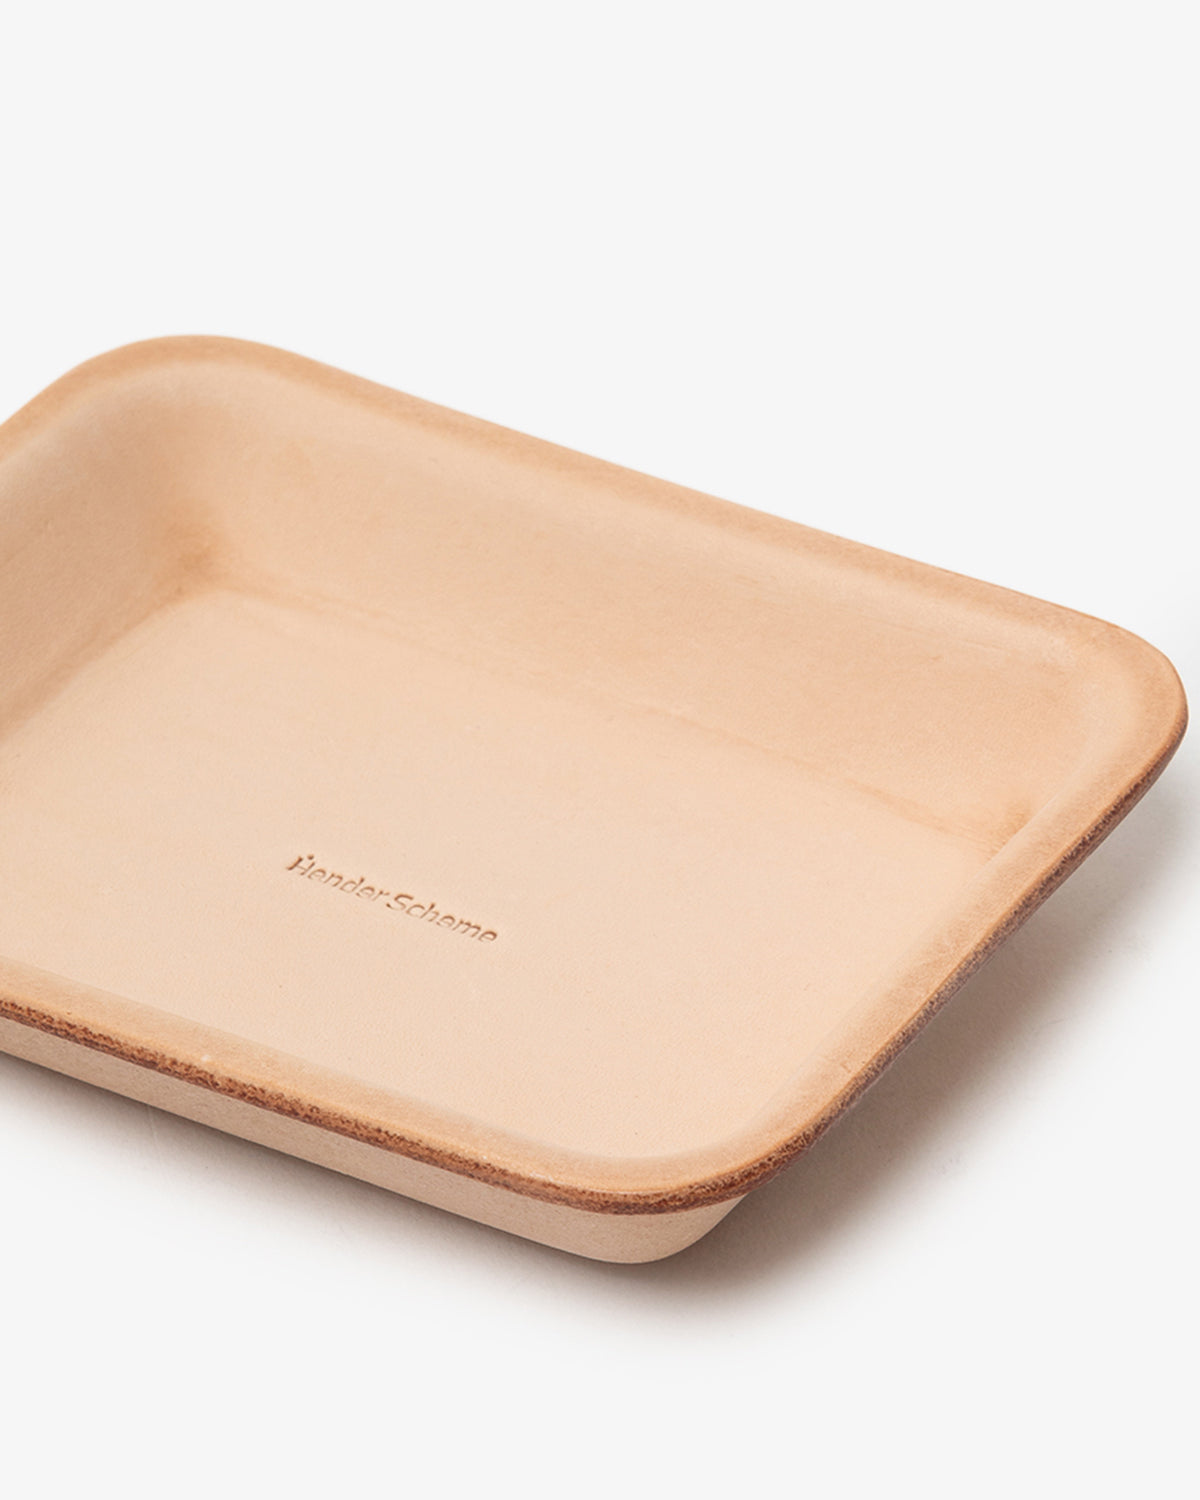 LEATHER TRAY S